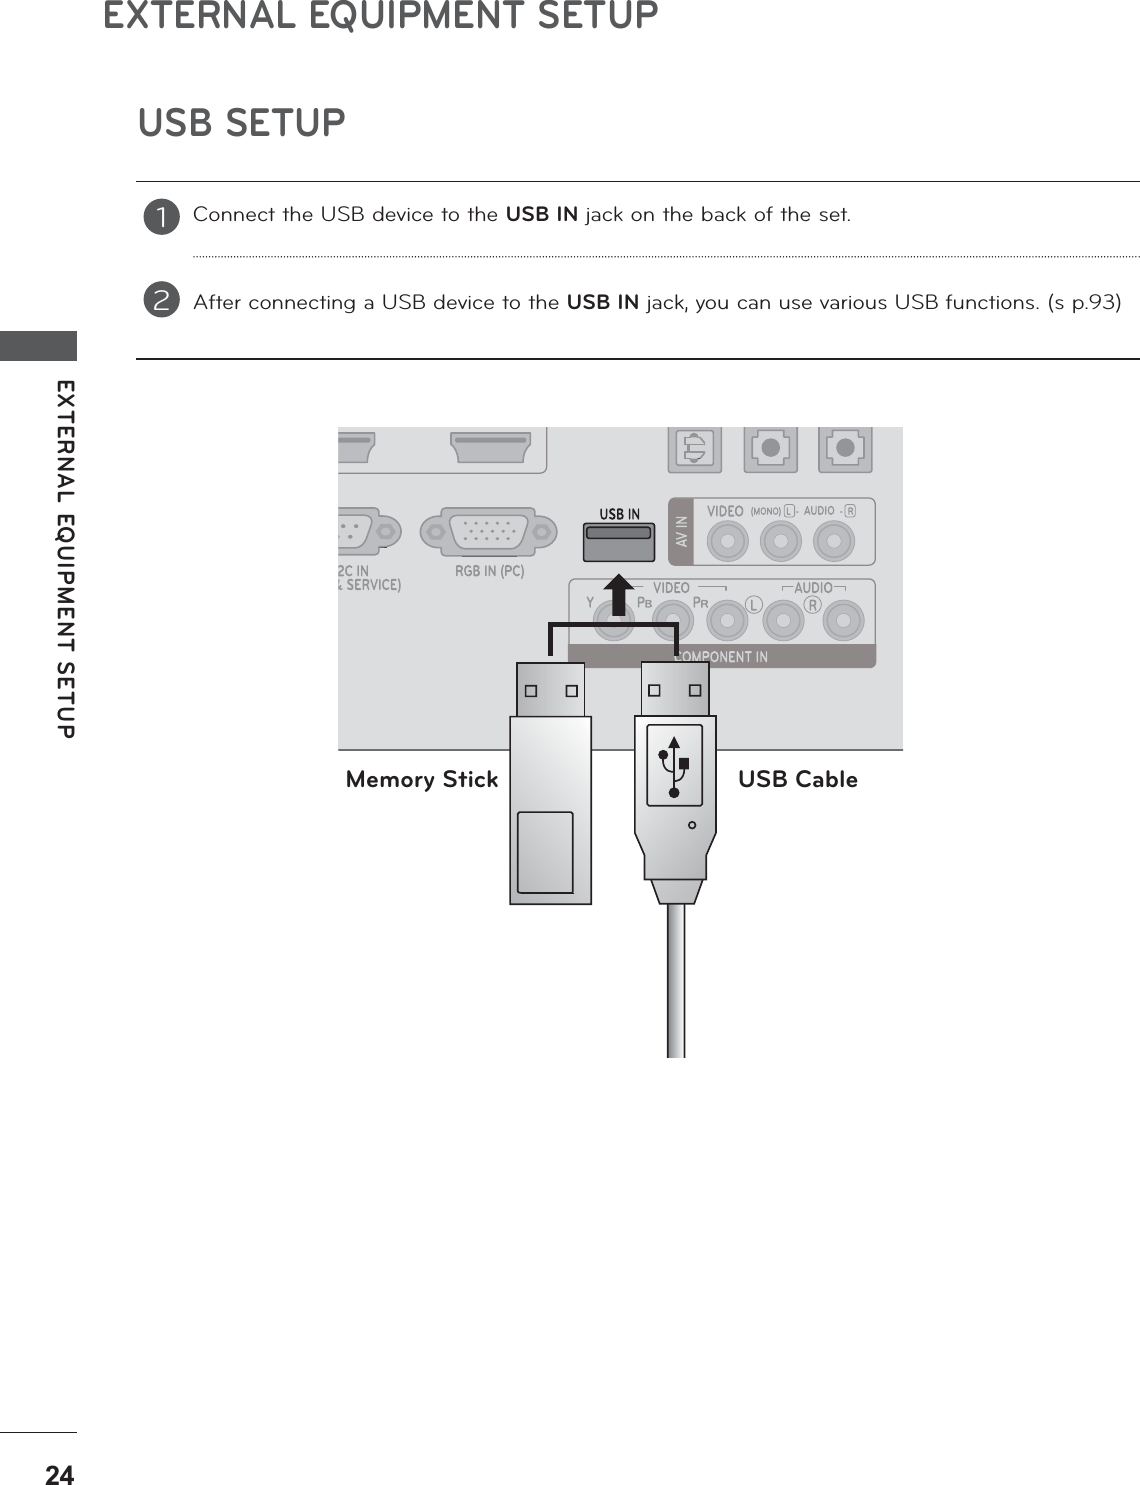 EXTERNAL EQUIPMENT SETUPEXTERNAL EQUIPMENT SETUPUSB SETUPConnect the USB device to the USB IN jack on the back of the set.After connecting a USB device to the USB IN jack, you can use various USB functions. (s p.93)12Memory Stick USB Cable